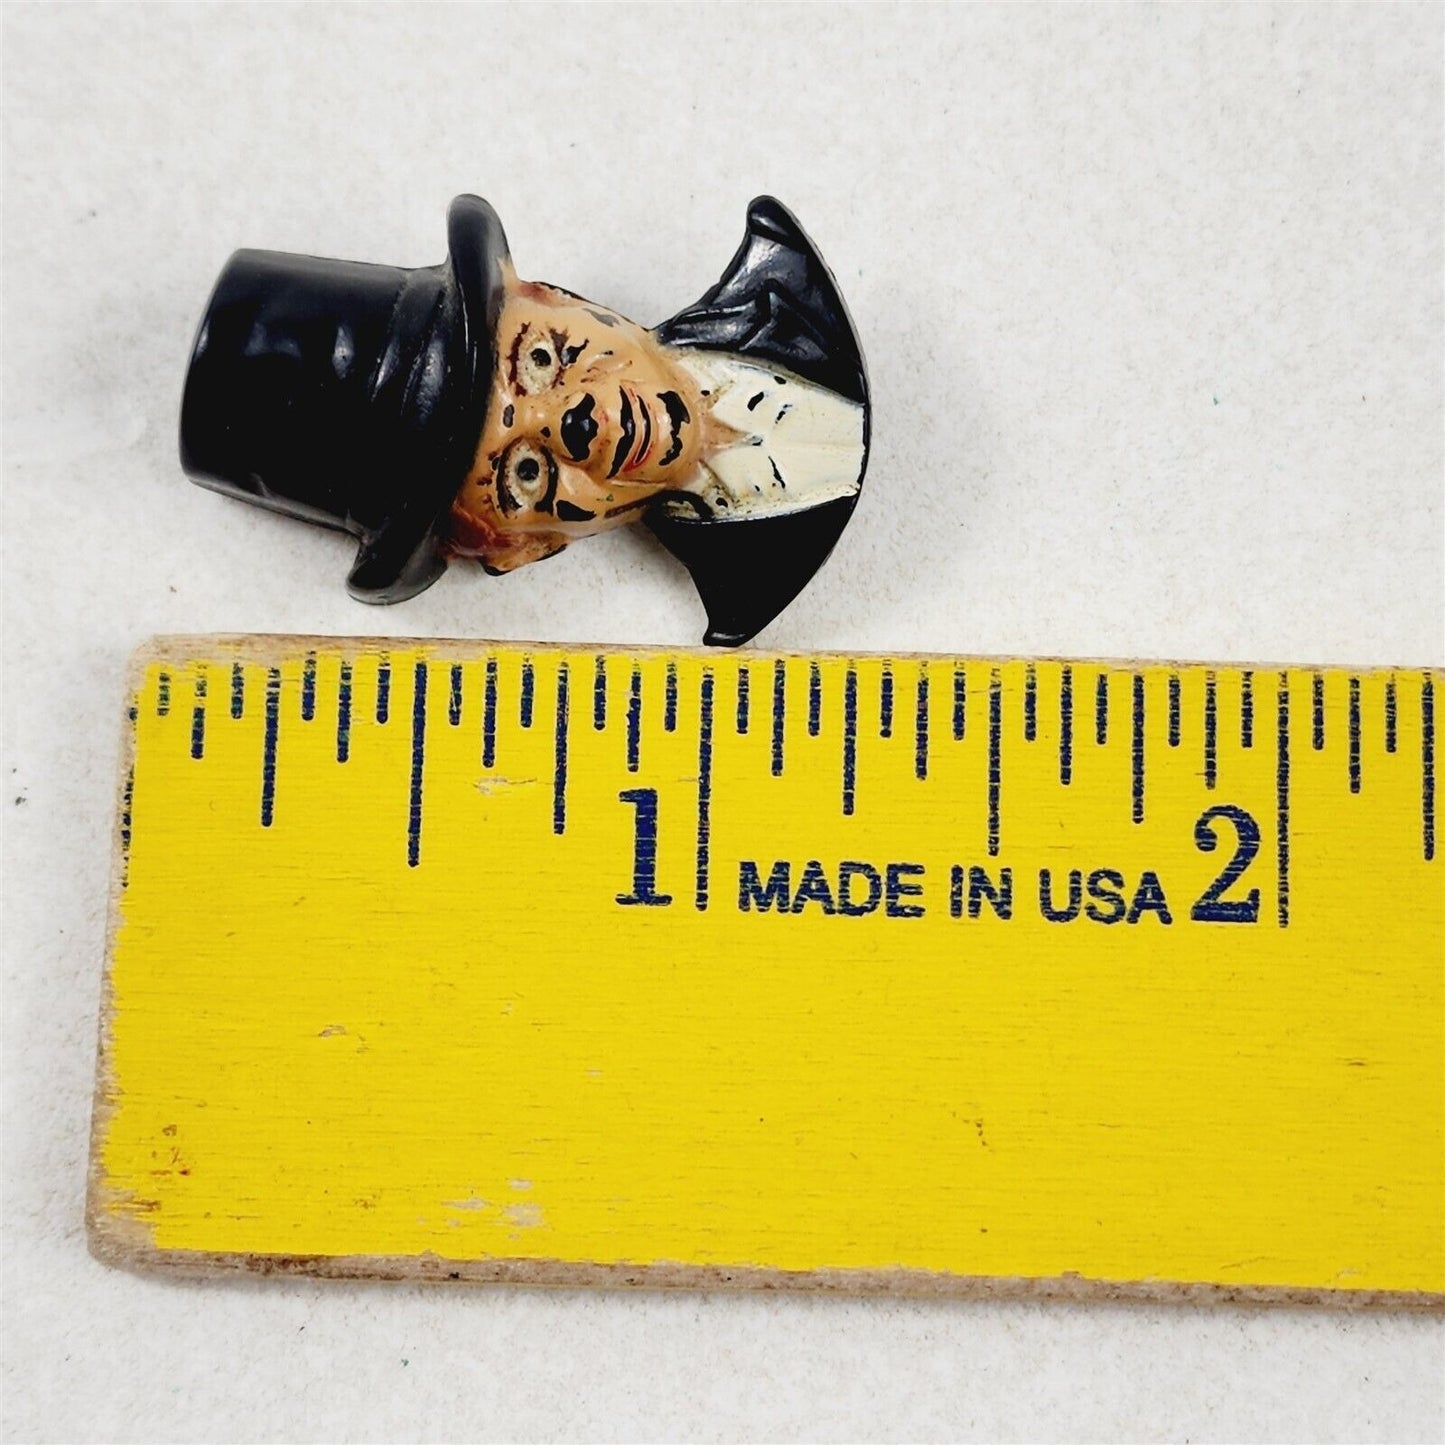 Vintage Charlie Chaplin Man Top Hat Suit Tuxedo with Glasses Monocle Brooch Pin